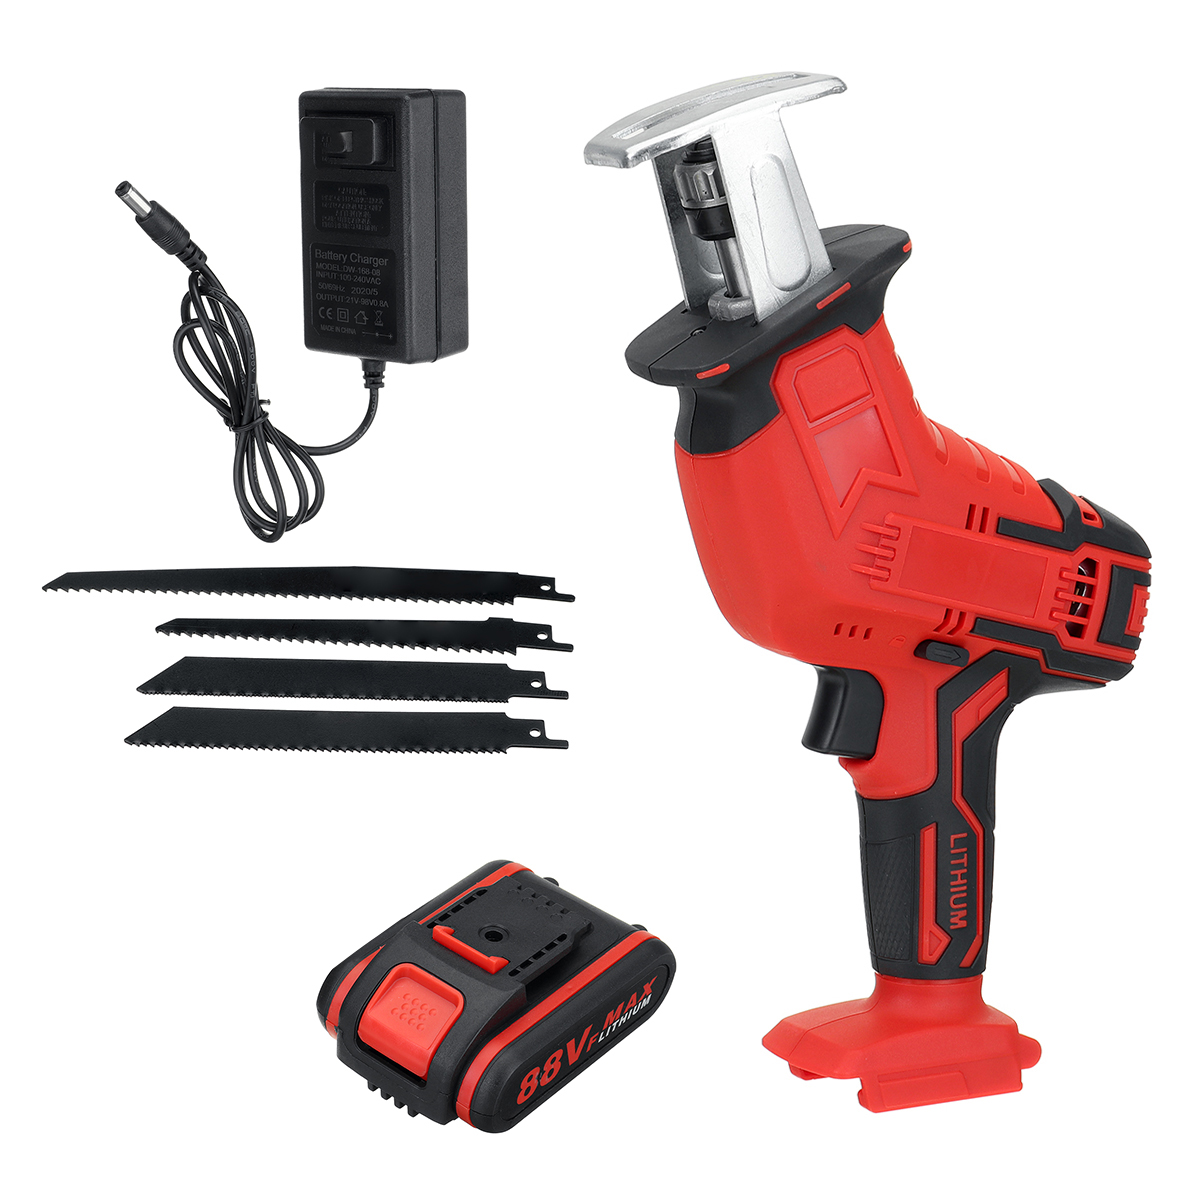 88VF-Electric-Reciprocating-Saws-Outdoor-Woodworking-Cordless-Portable-Wood-Cutting-Saw-1718639-9